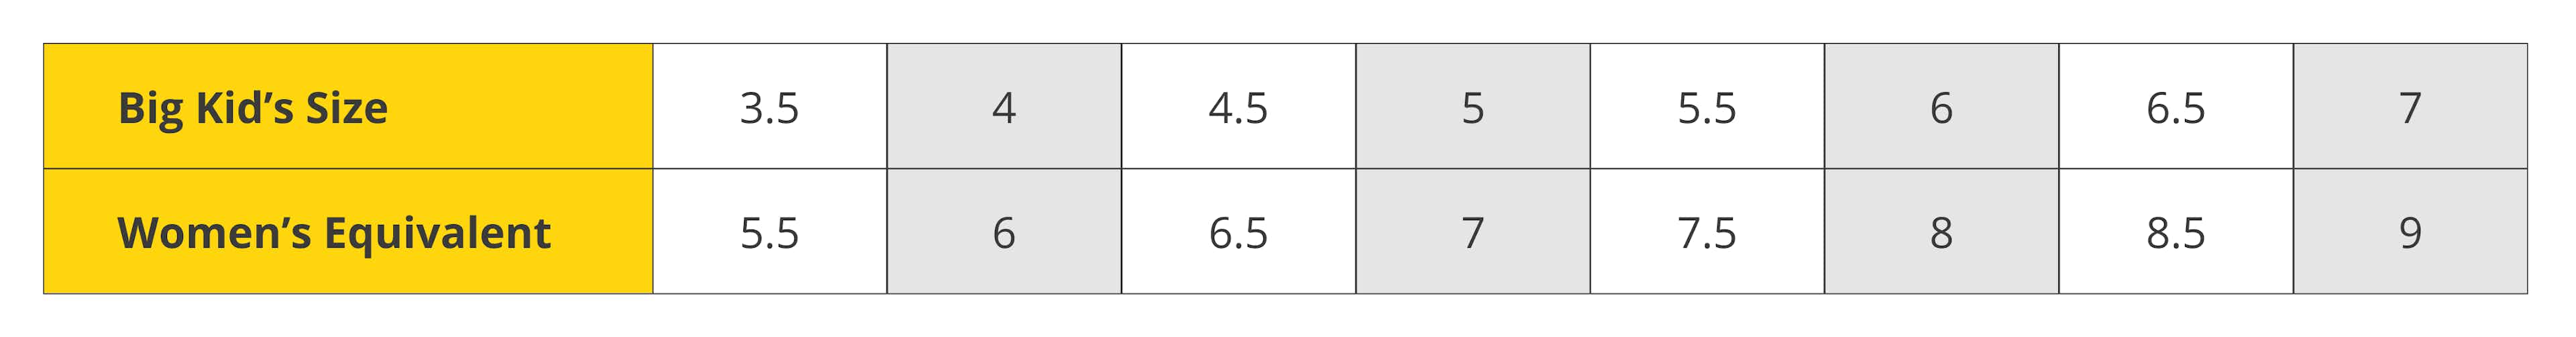 A table comparing big kids shoe sizes to women's shoe sizes